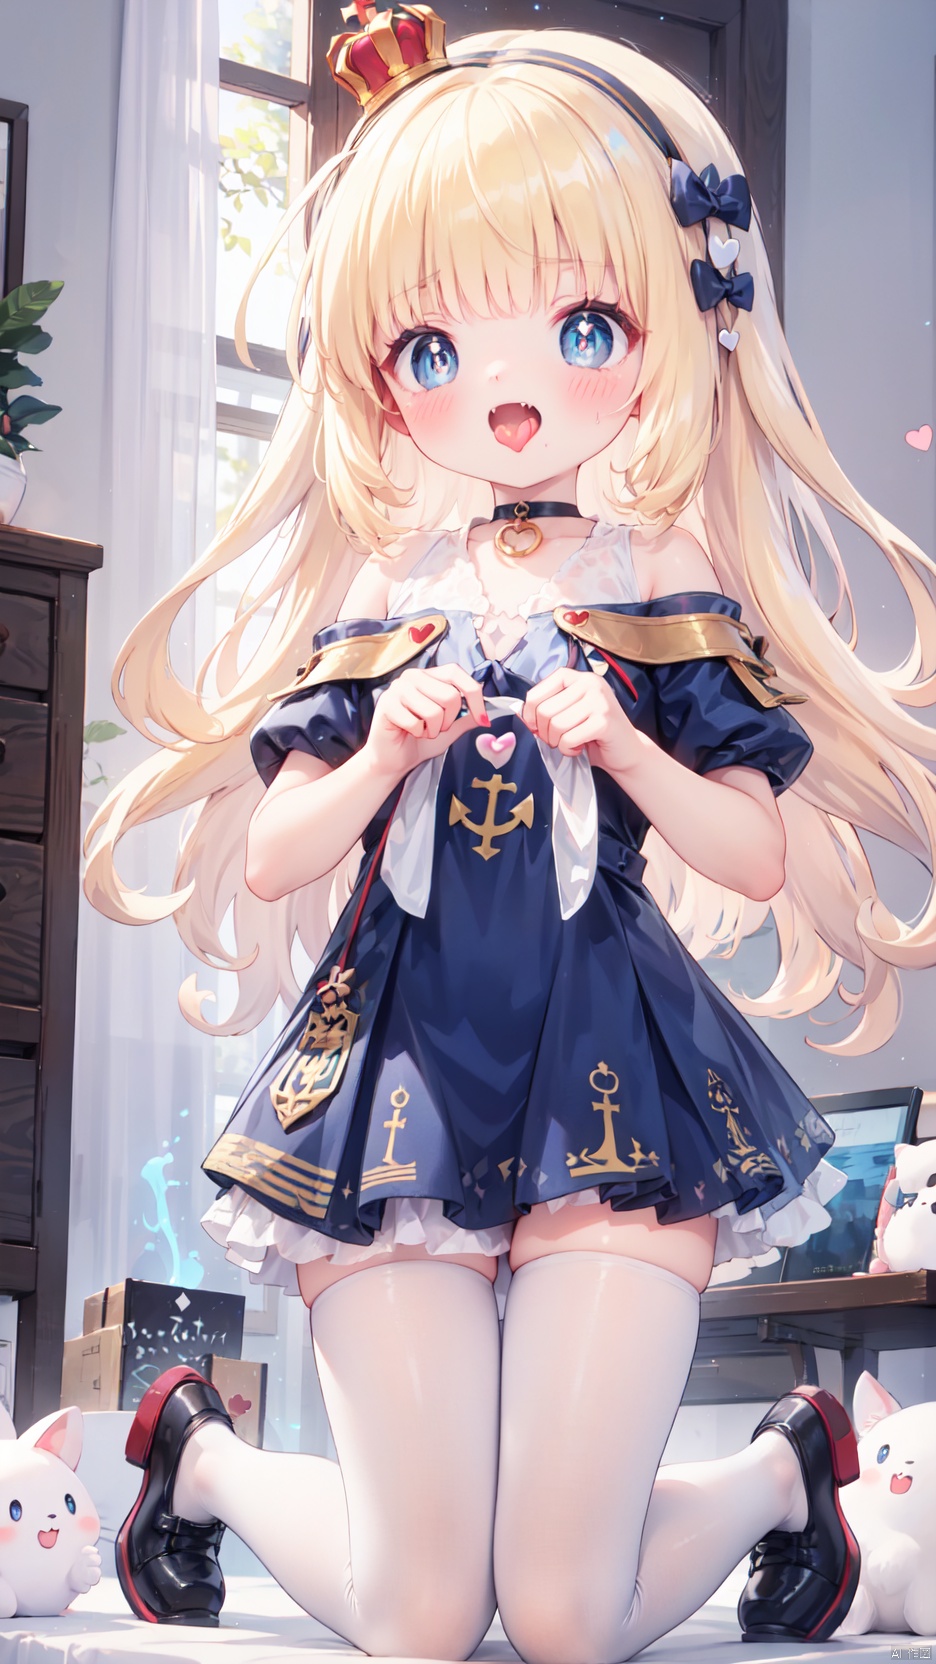  from below,queen elizabeth (azur lane),Little girl(1.5),aged down,beautiful detailed girl,narrow waist,Delicate cute face,princess crown,small crown,anchor choker,(anchor print naval uniform),blue princess dress,ornate clothes,fine fabric emphasis,blue eyes,beautiful detailed eyes,Glowing eyes,((heart-shaped pupils)),((blonde hair)),((hair spread out,wavy hair)),very long shoulder,glowing hair,Extremely delicate hair,Thin leg,white legwear garter,black footwear,Slender fingers,steepled fingers,shiny nails,((kneeling,**********)),ahegao(expression),smile,open mouth,tongue out,licking lips,drooling,heavy breathing,fangs out,big fangs,puffy cheeks,beautiful detailed mouth,looking down at viewer,anchor (ornament),warship,harbor,royal navy (emblem),royal navy flag,hyper realistic,magic,4k,incredible quality,best quality,masterpiece,highly detailed,extremely detailed CG,cinematic lighting,light particle,backlighting,full body,high definition,detail enhancement,(perfect hands, perfect anatomy),8k_wallpaper,extreme details,colorful